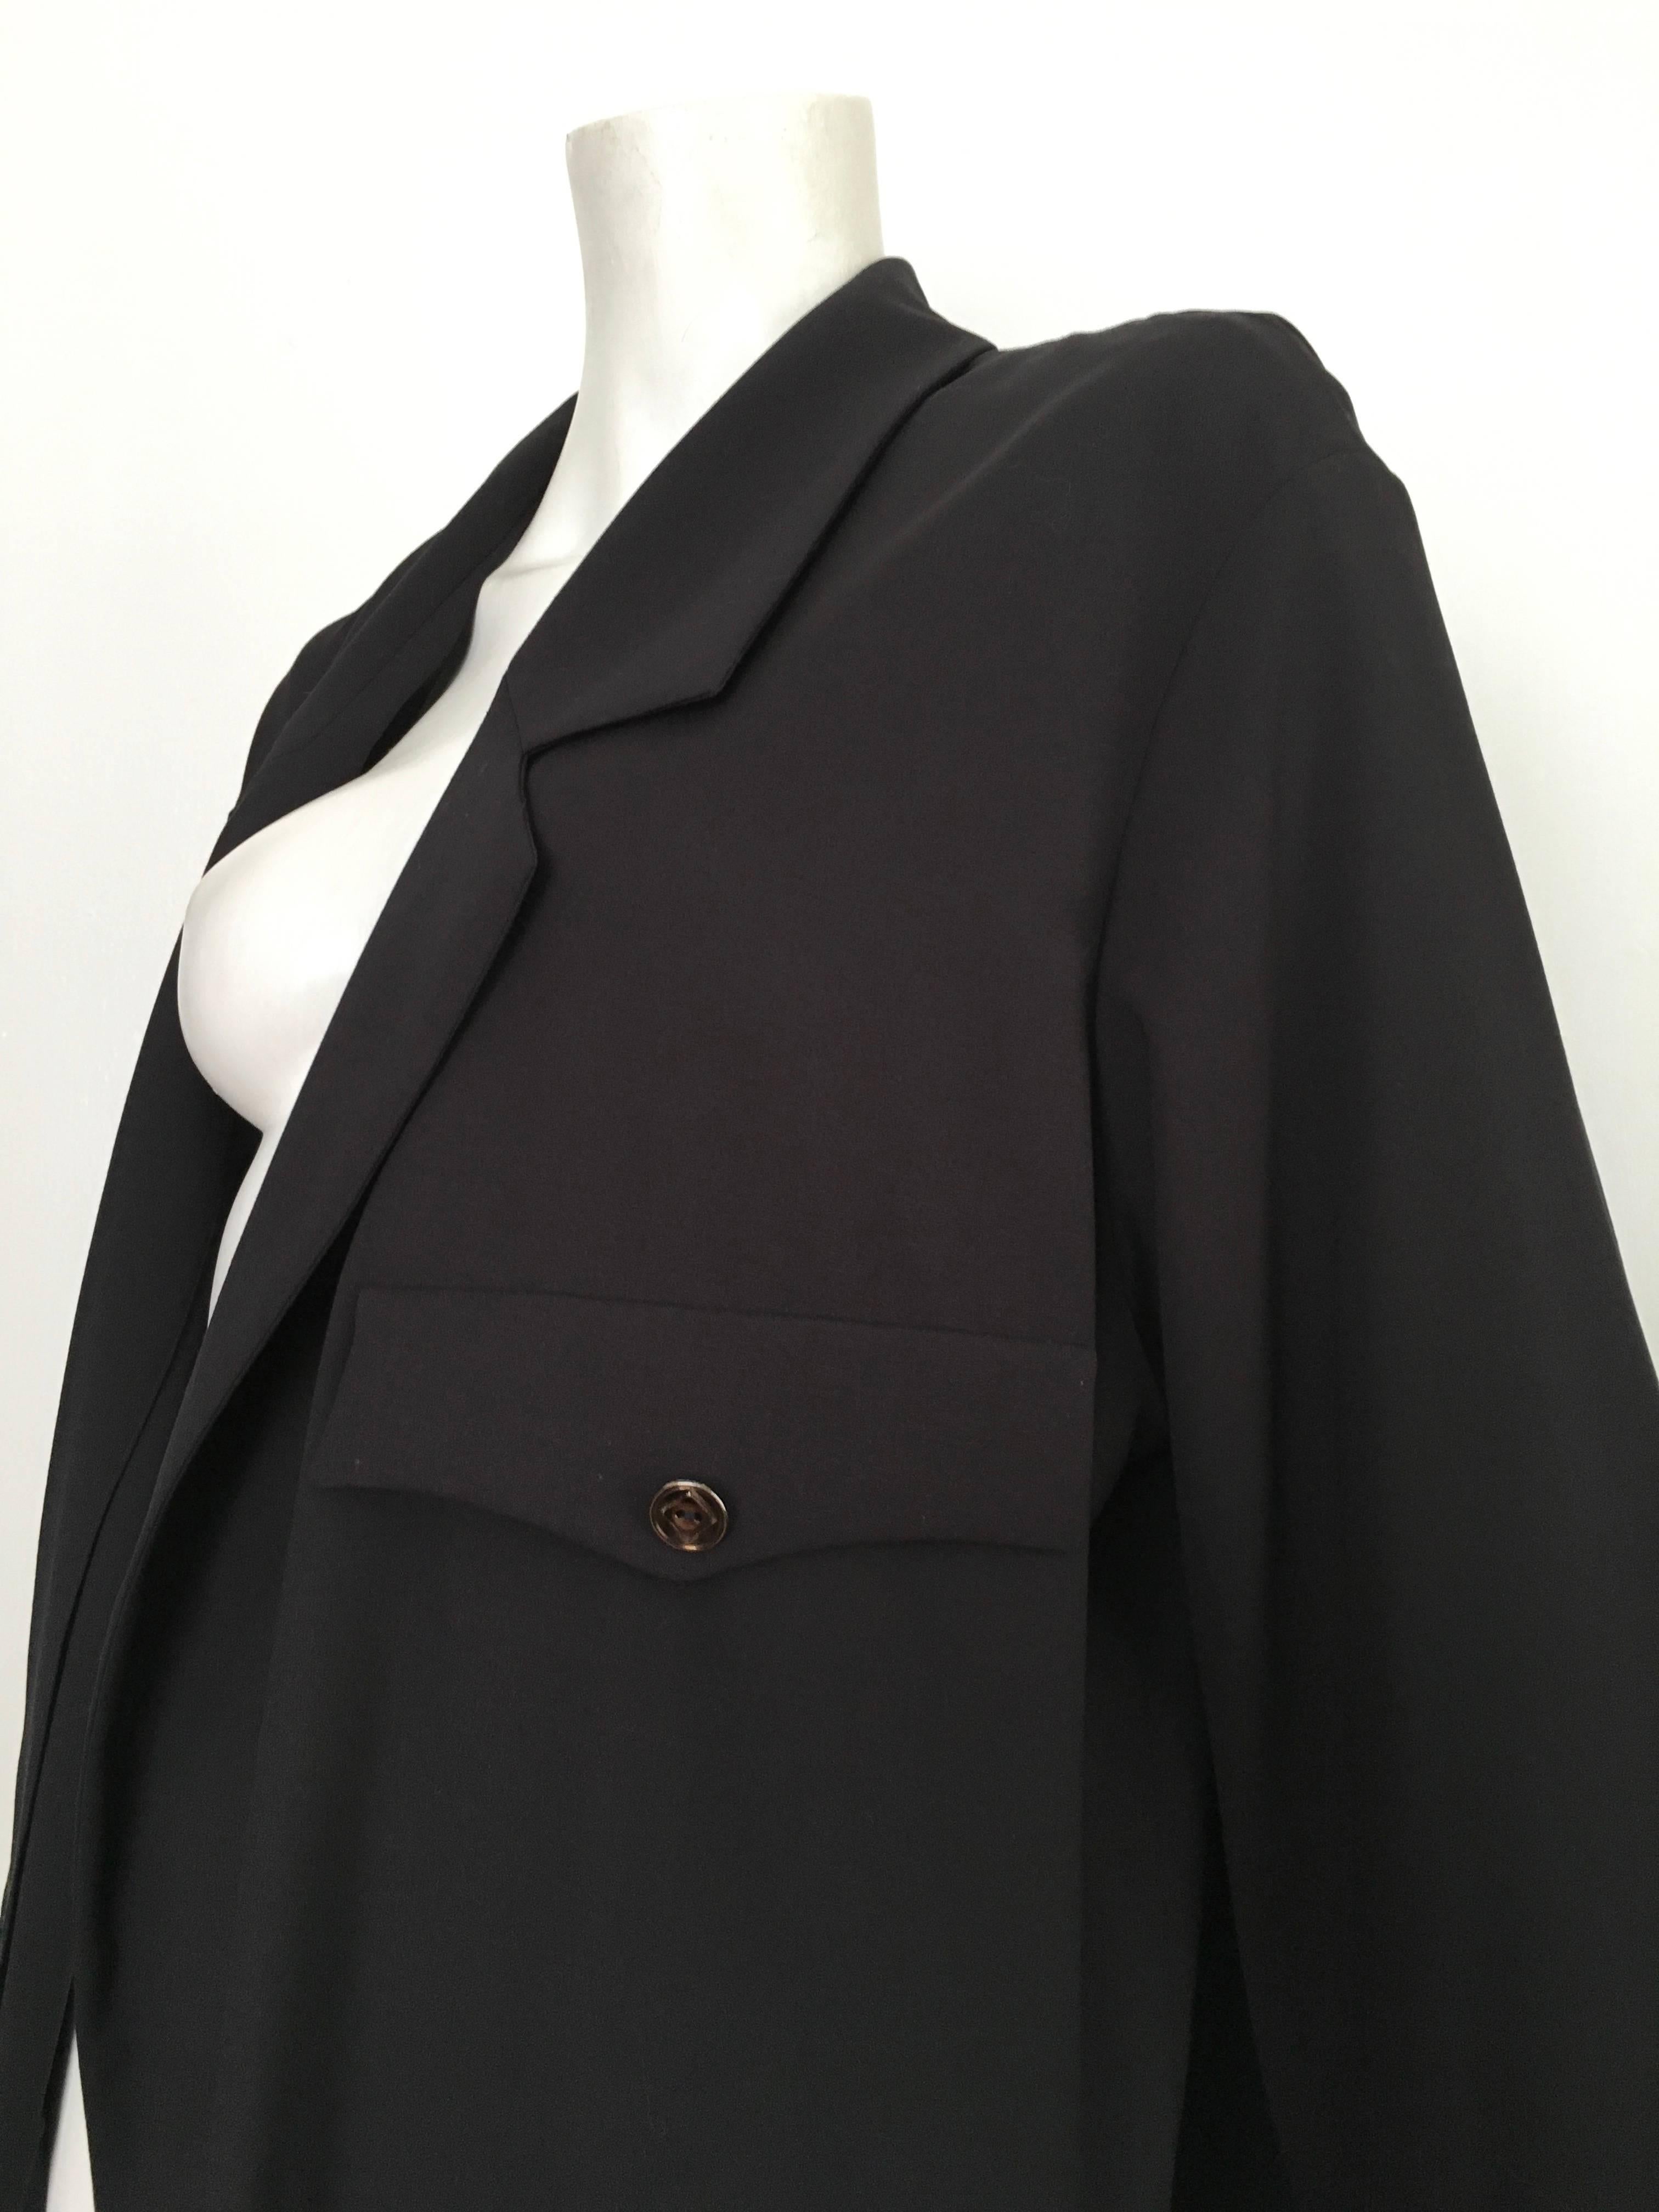 Karl Lagerfeld 1990s Navy Wool Smock Jacket Size 10.  For Sale 4